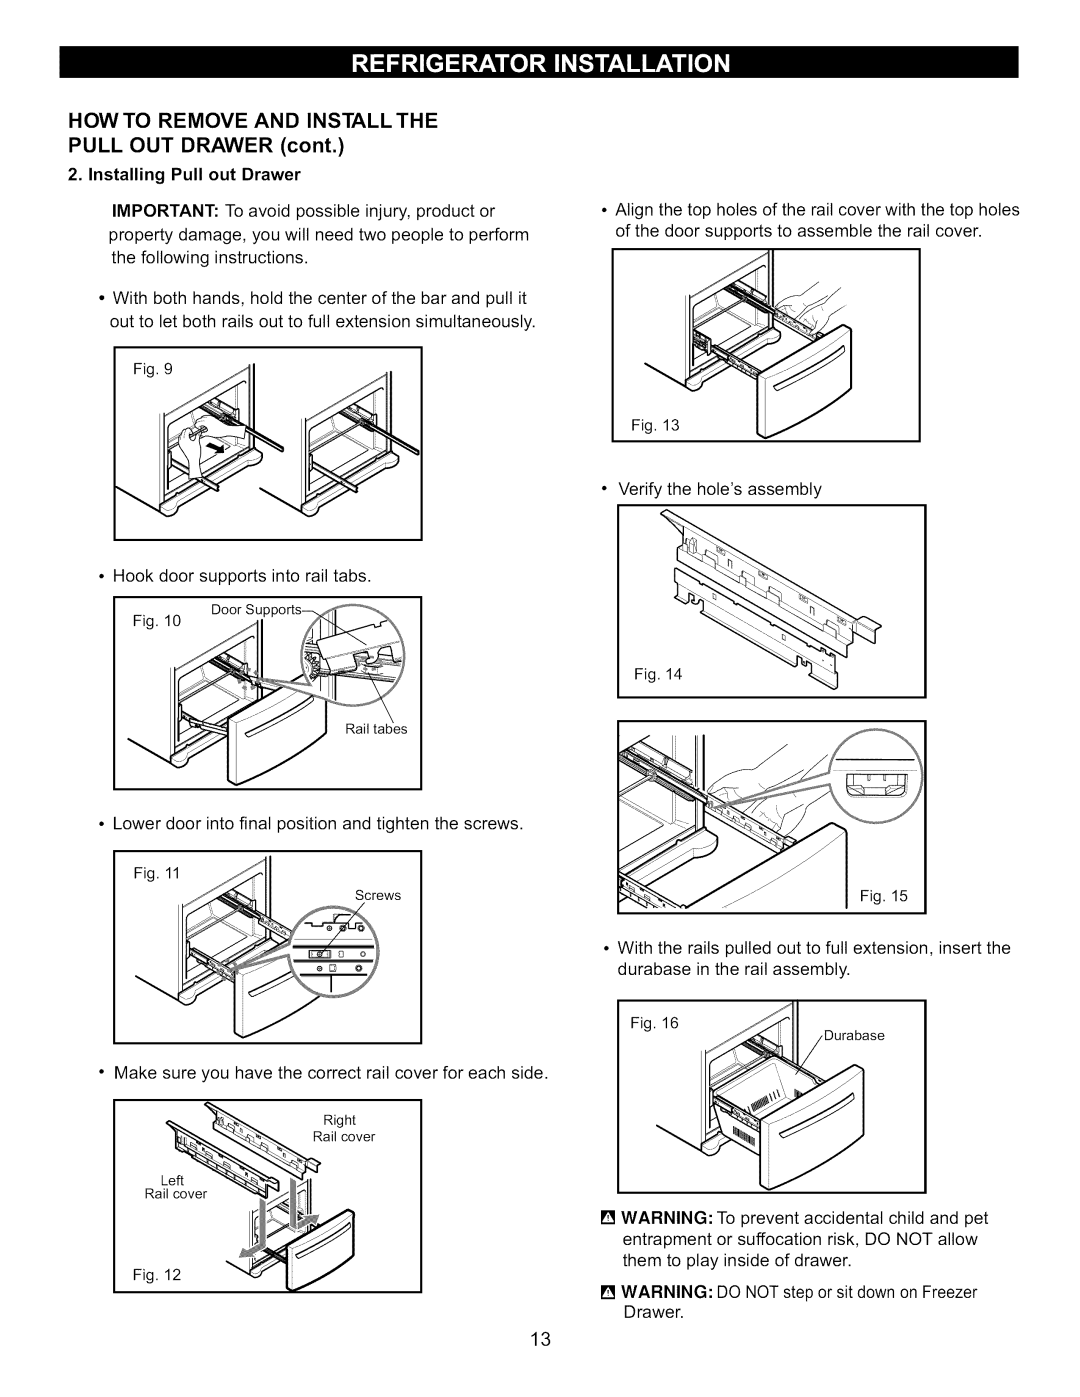 Kenmore 795.7130-K manual How To Remove And Install The, PULL OUT DRAWER cont, Installing Pull out Drawer 